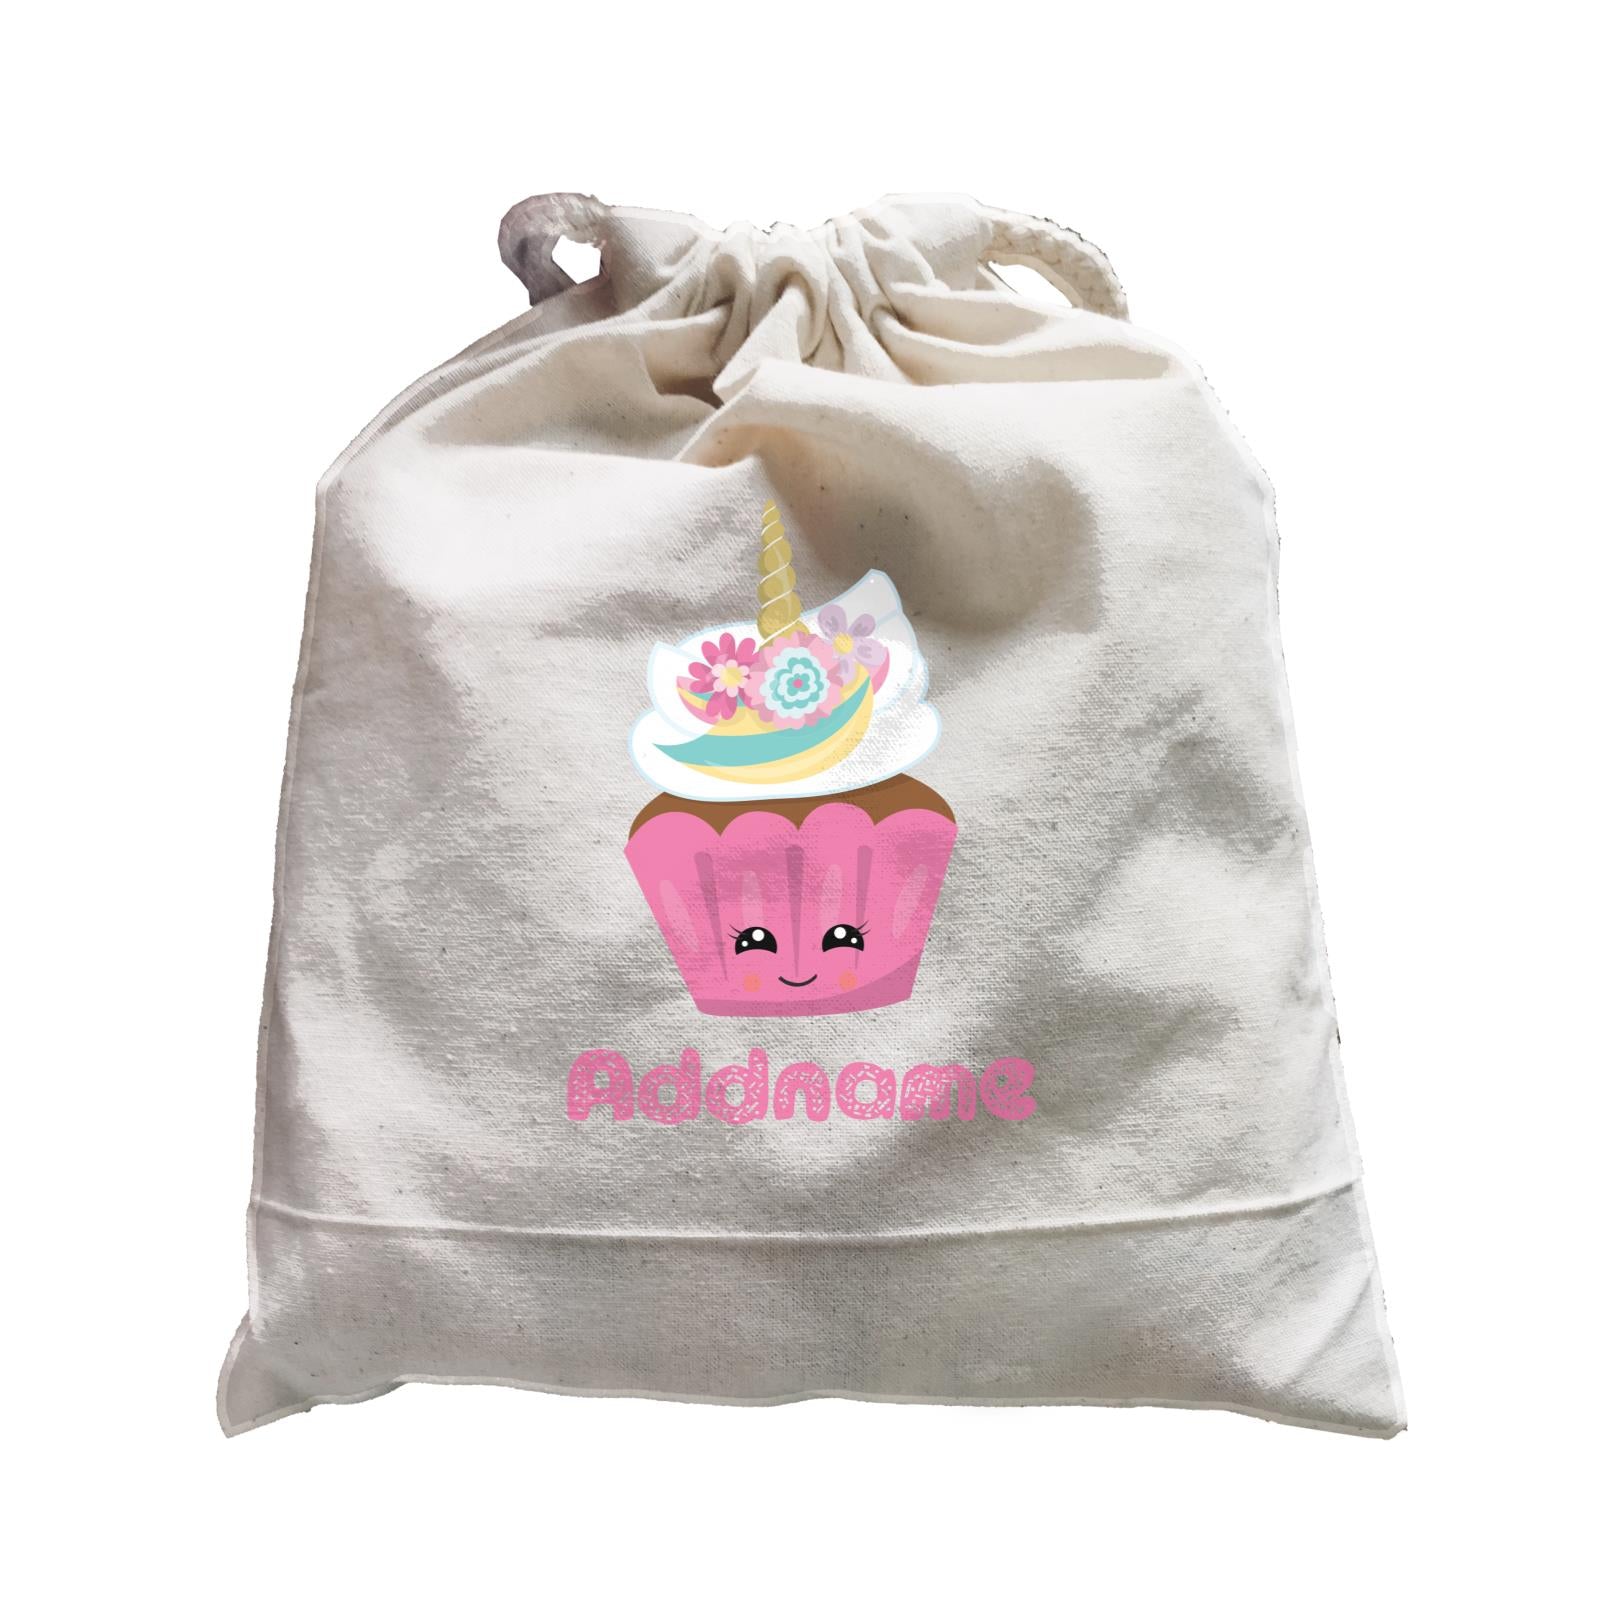 Magical Sweets Pink Cupcake Addname Satchel